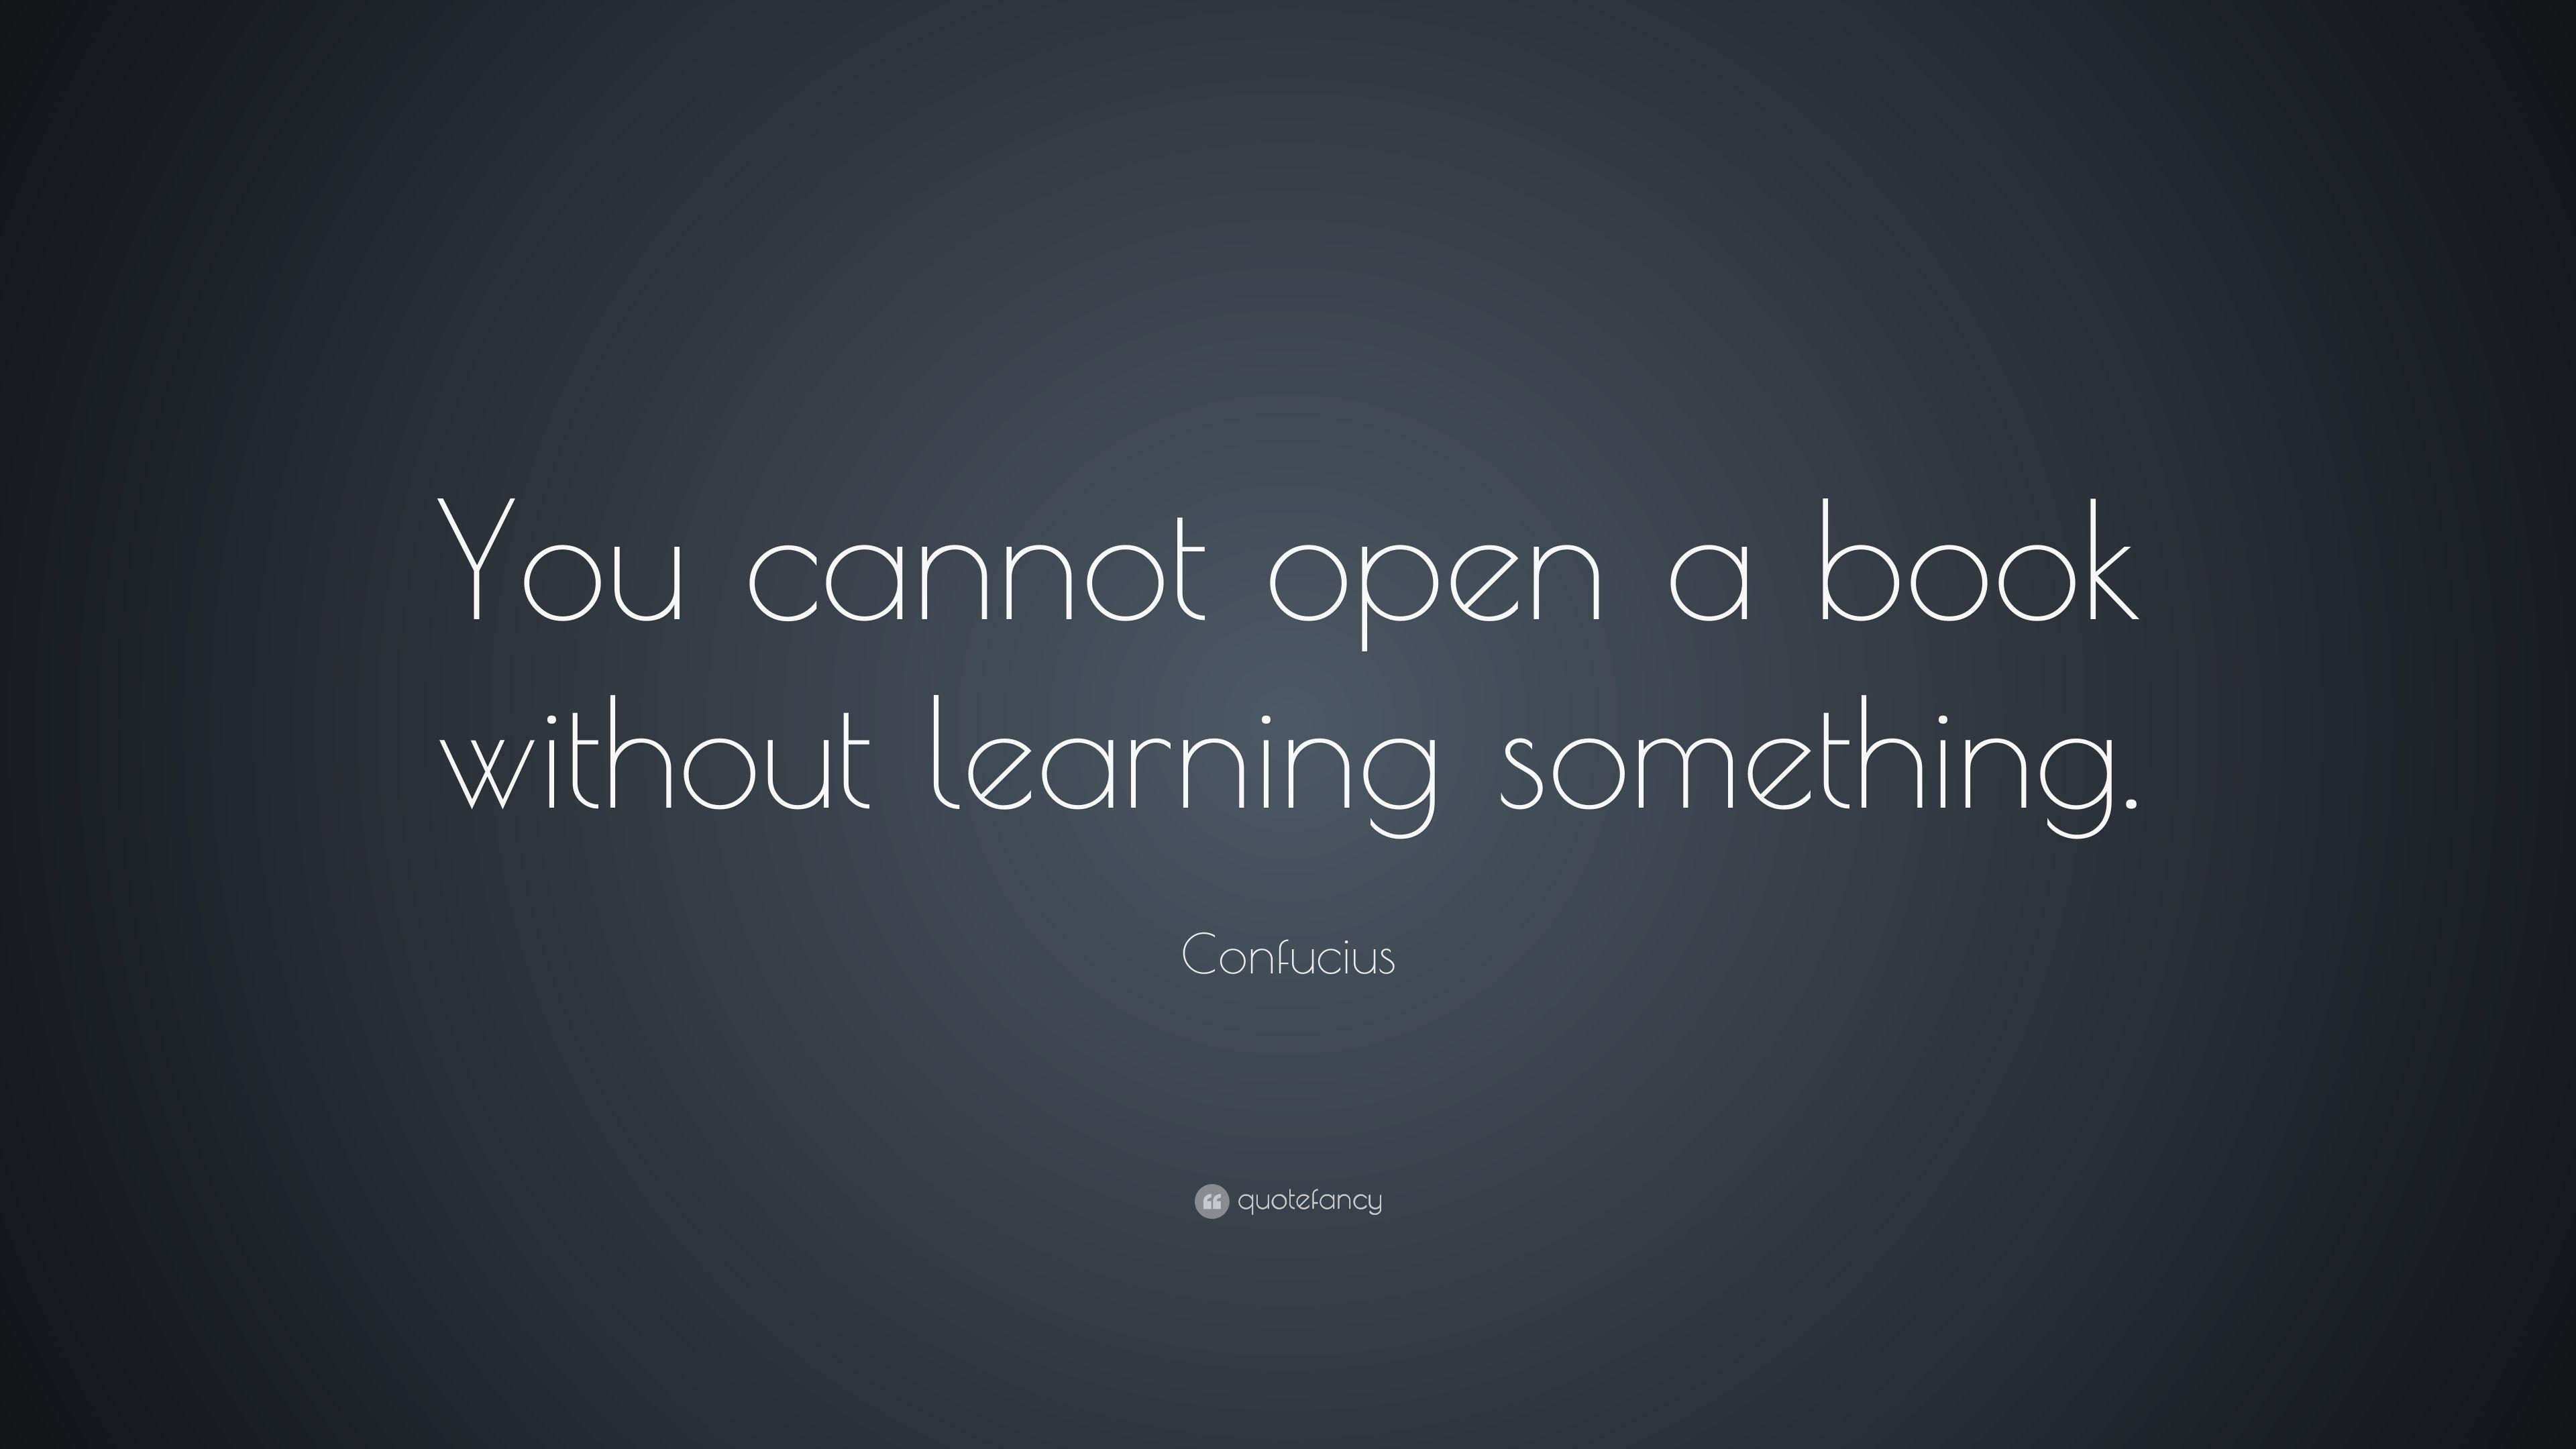 Confucius Quote: “You cannot open a book without learning